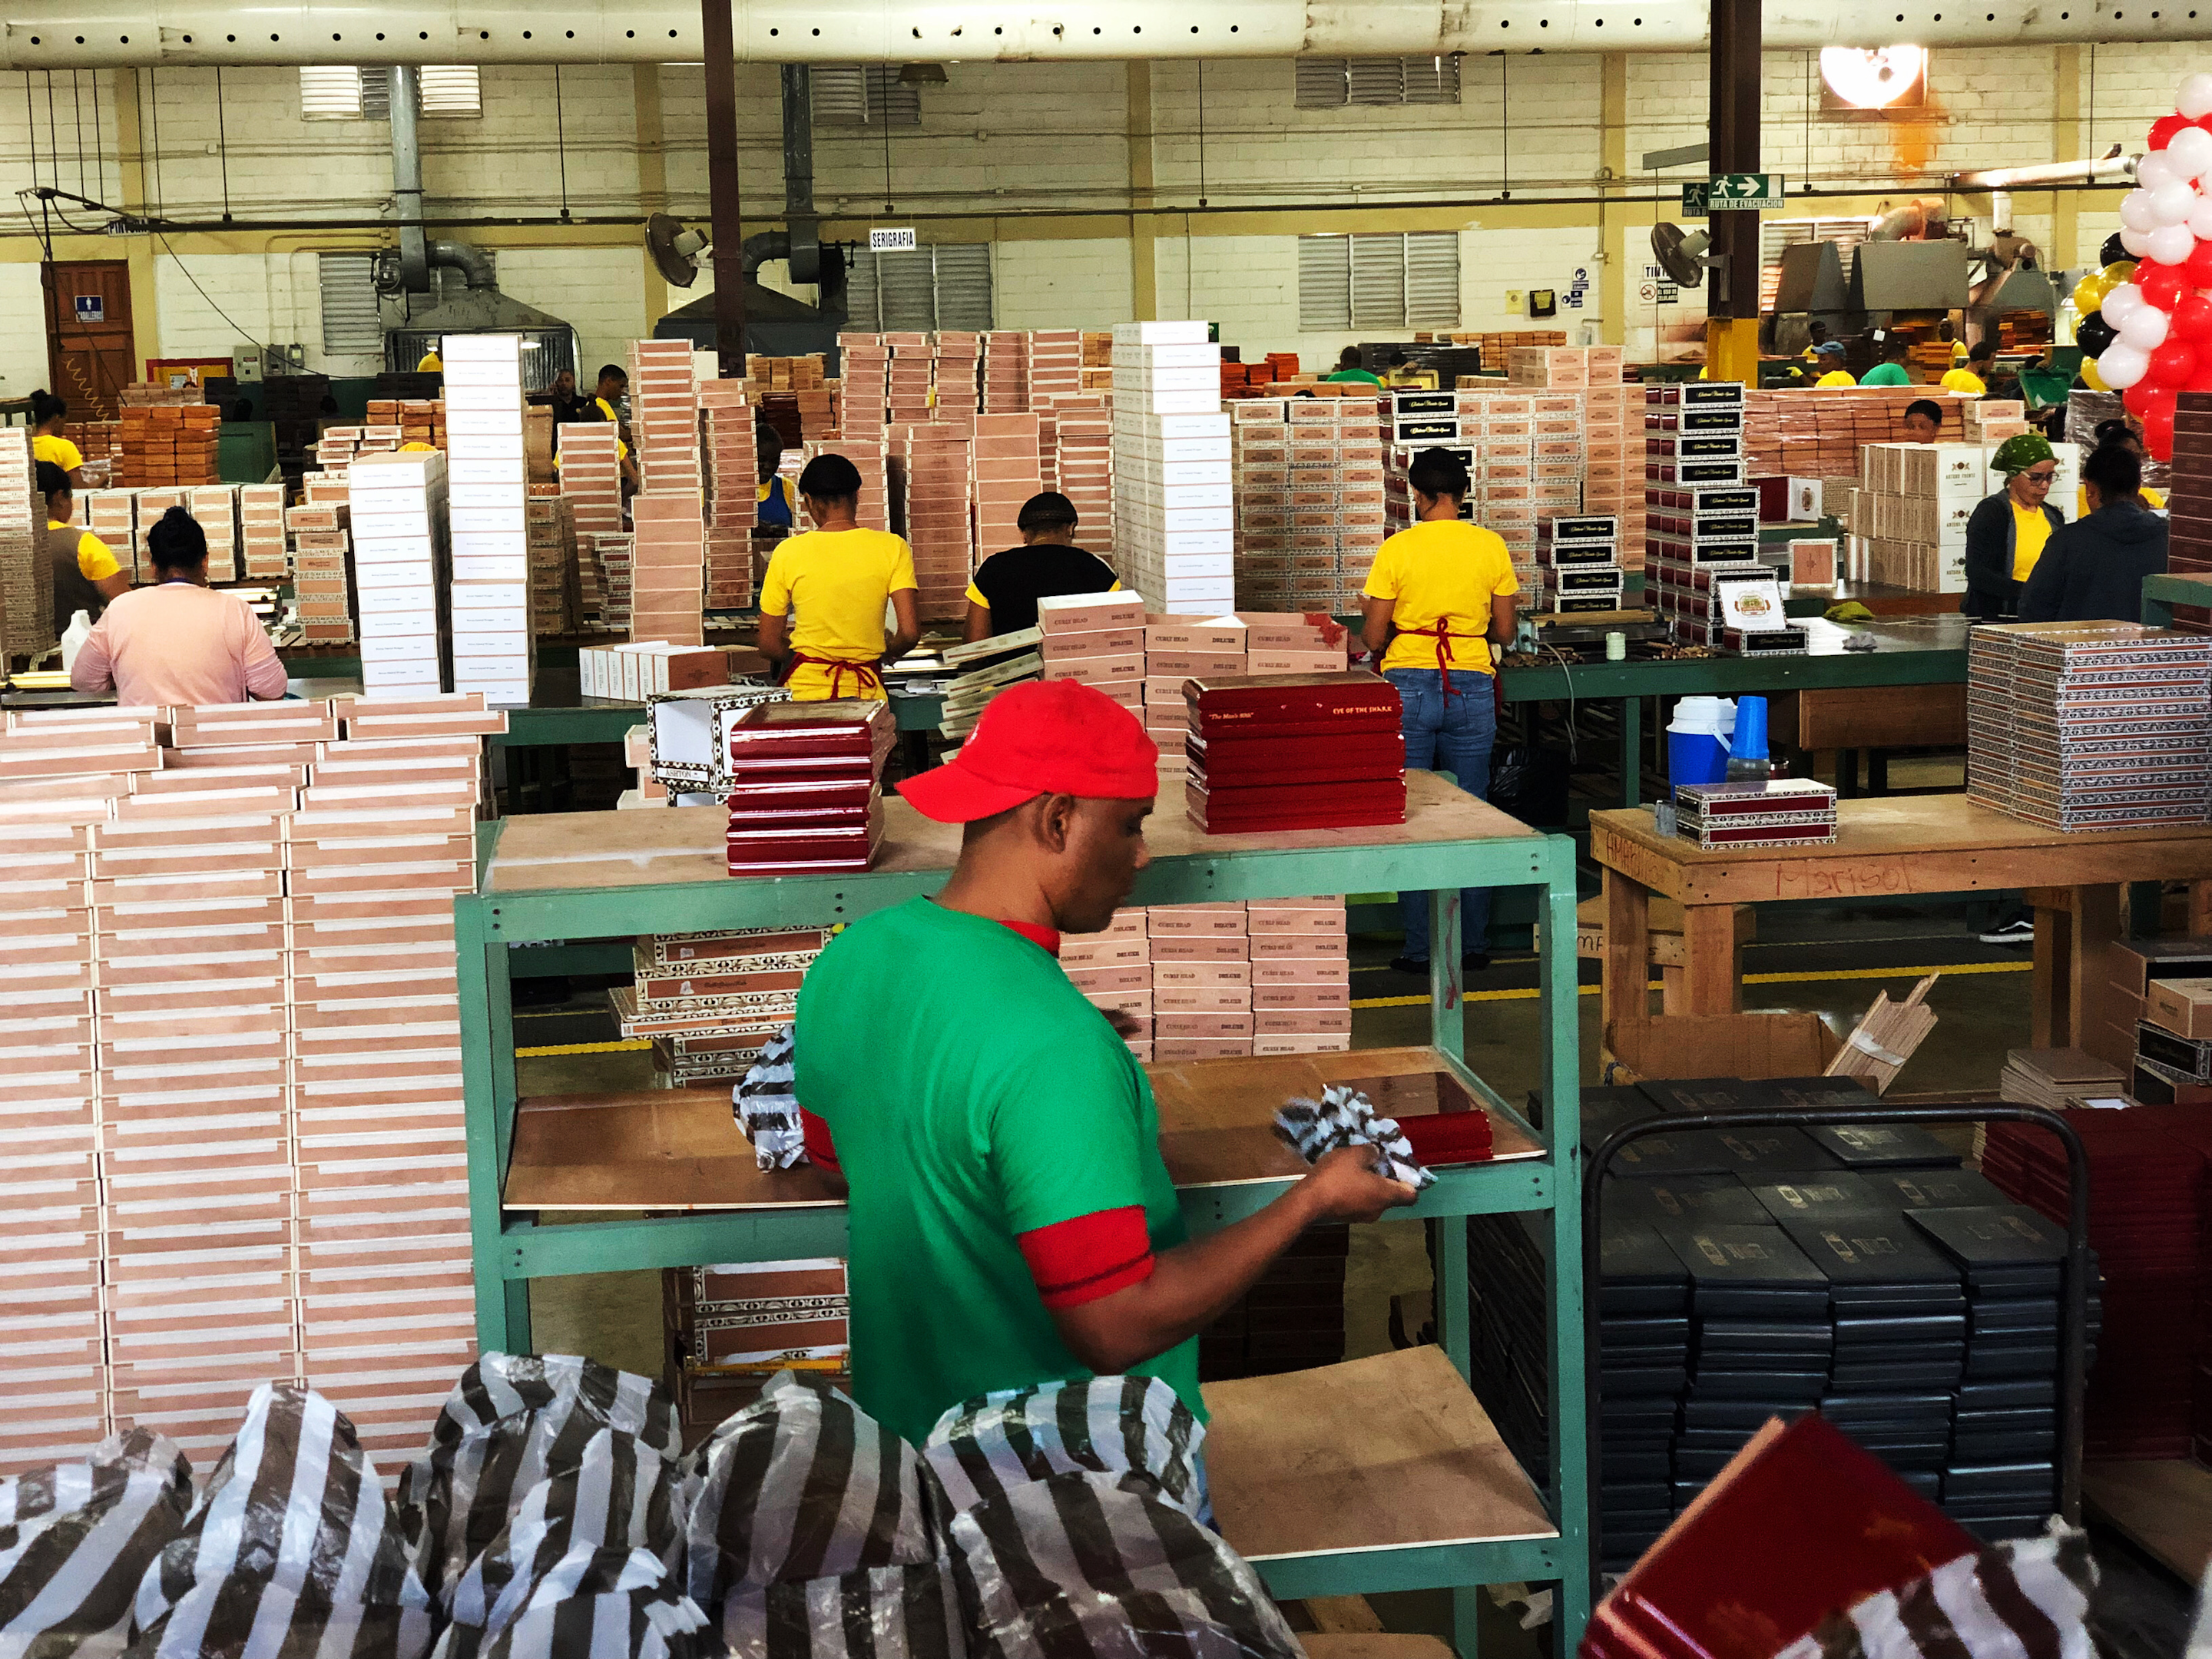 Arturo Fuente Cigar Factory in the Dominicam Republic, an ourtanding cigar factory following traditions